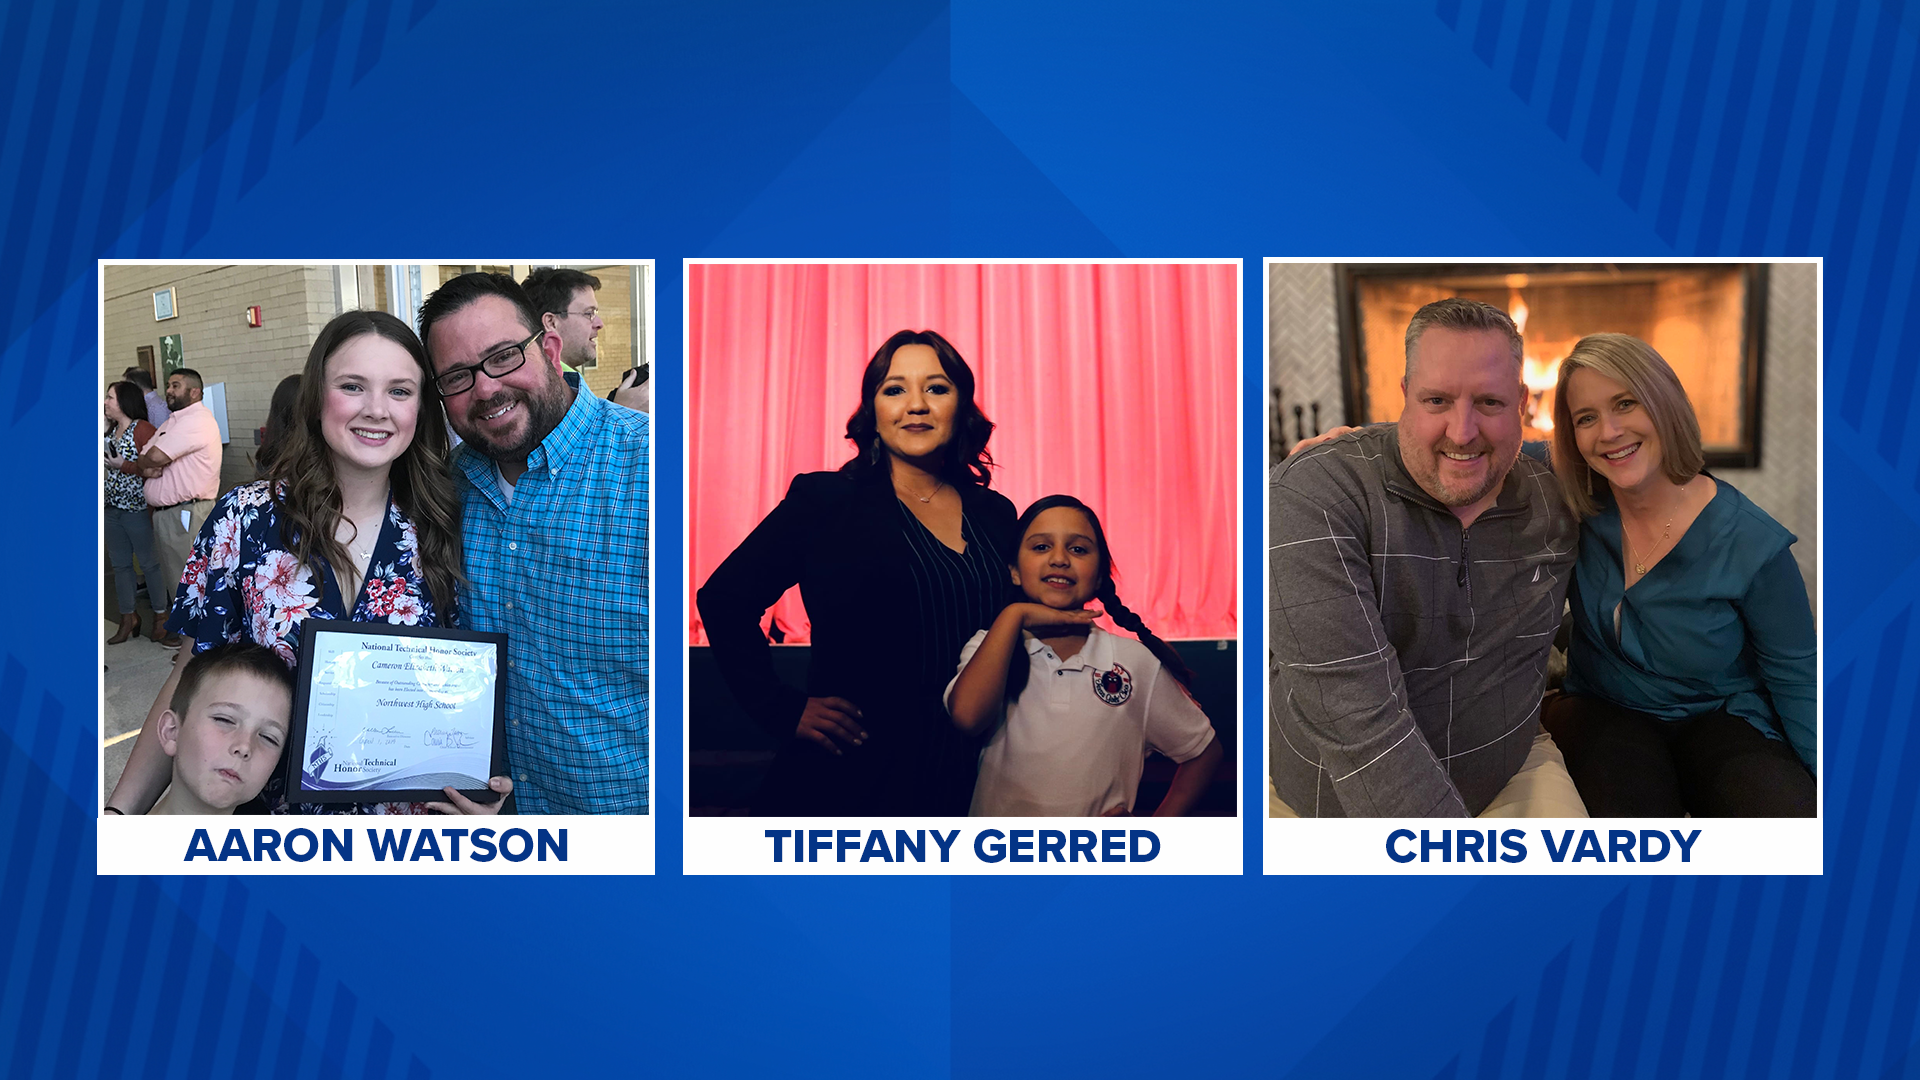 Chris Vardy, Tiffany Gerred and Aaron Watson were all beloved parents who were driving to work, their friends and family said.